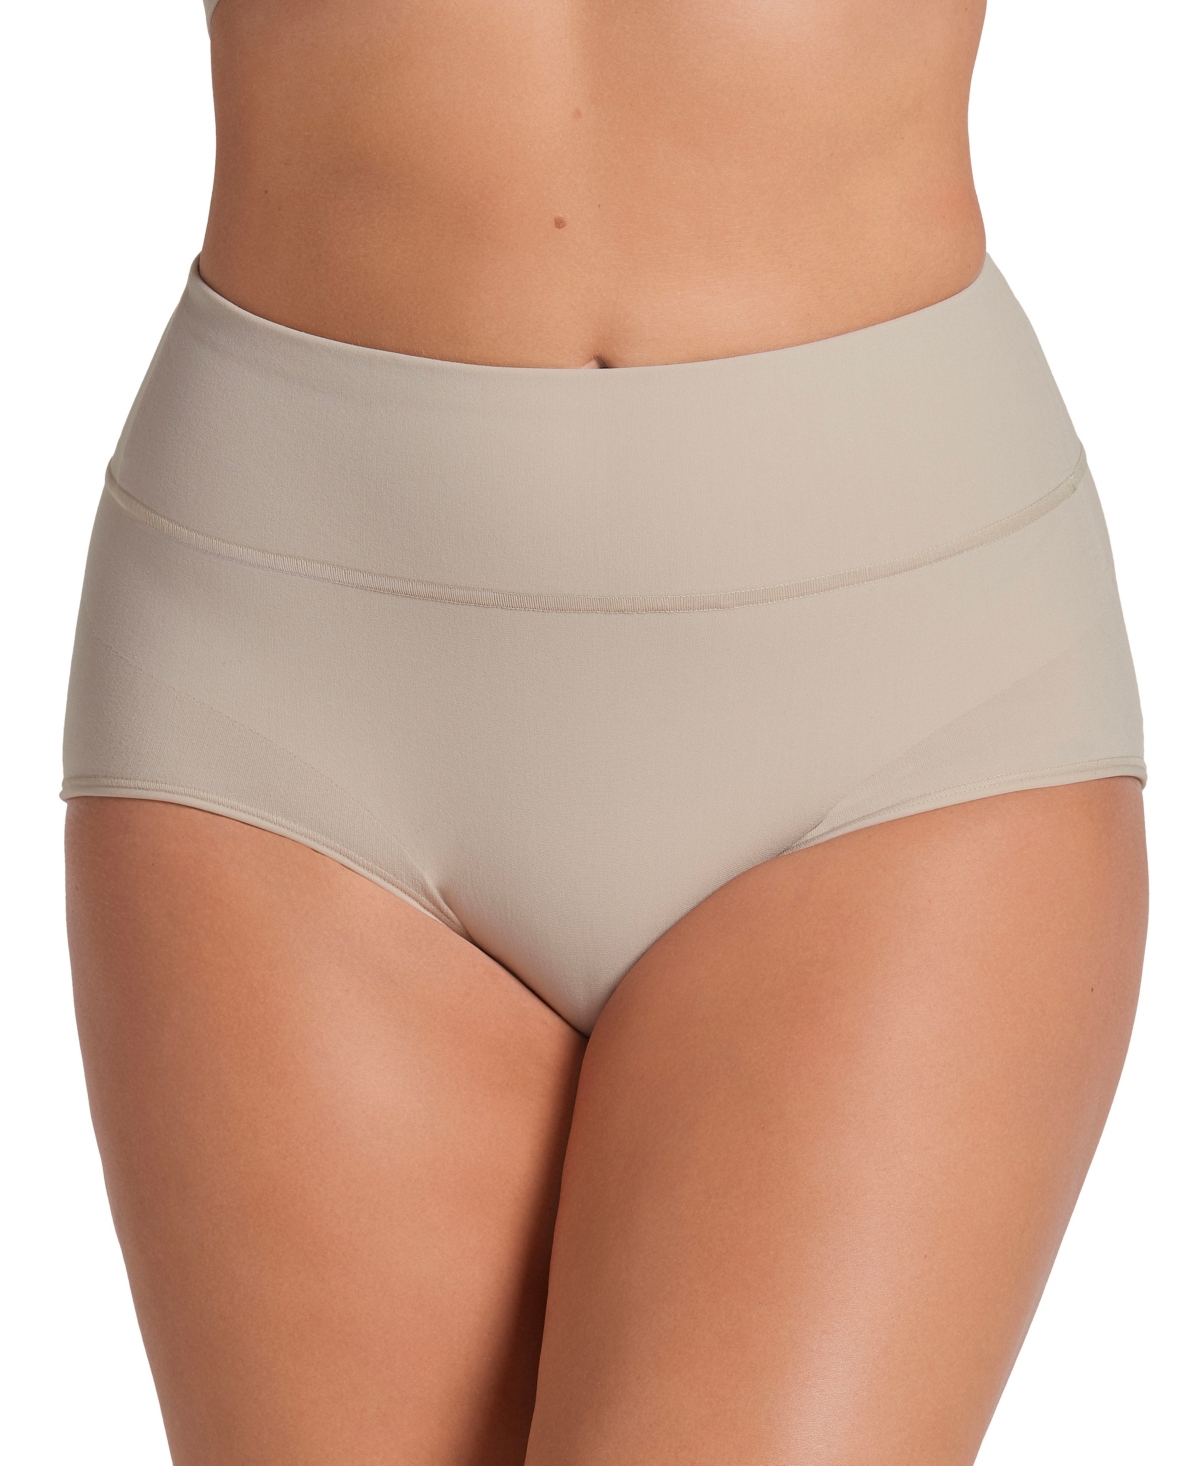 Women's High-Waisted Classic Smoothing Brief - Light Beige